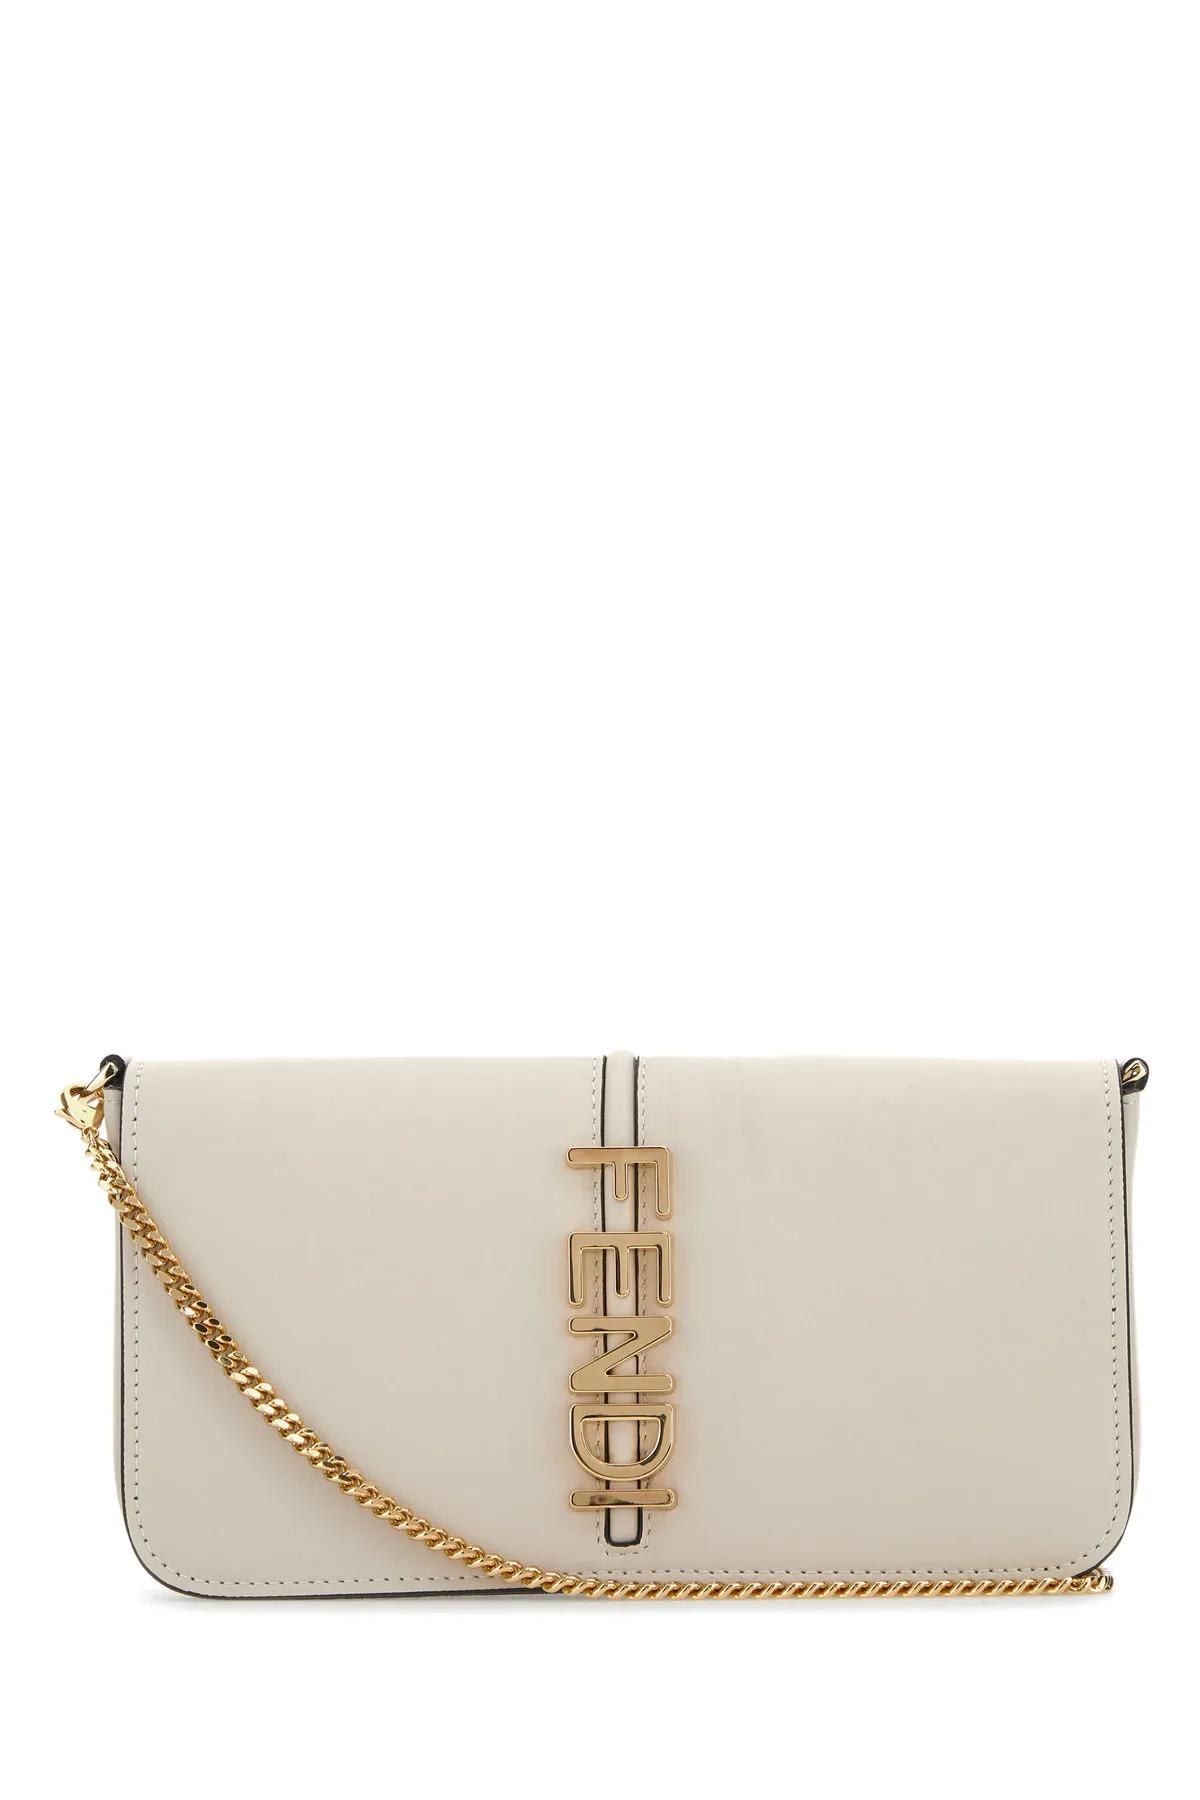 Fendi Ivory Leather Graphy Wallet